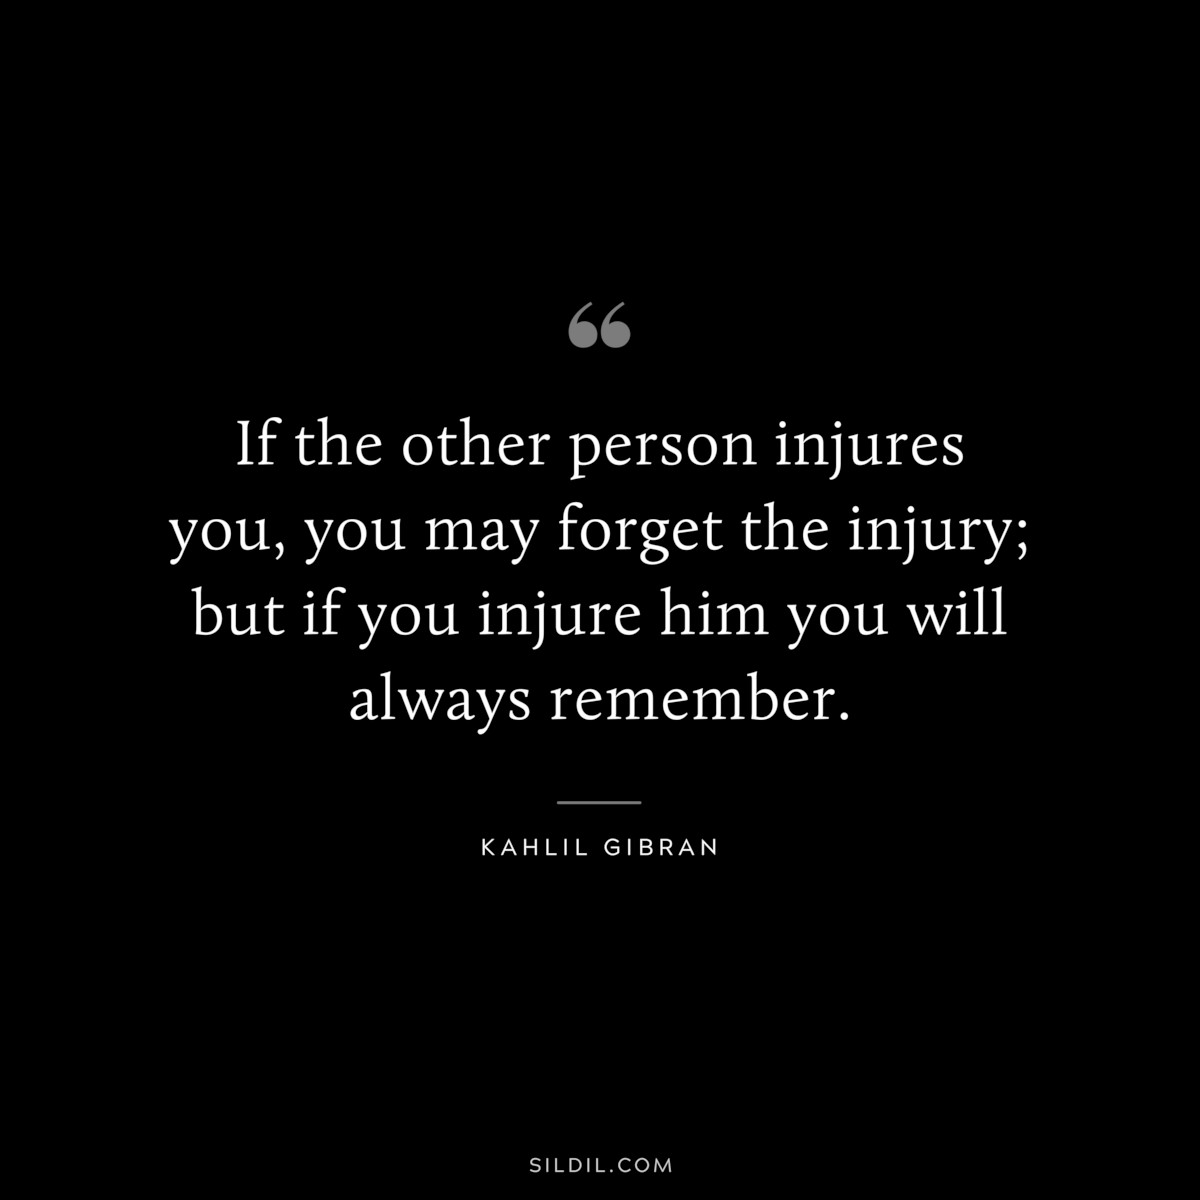 If the other person injures you, you may forget the injury; but if you injure him you will always remember. ― Kahlil Gibran